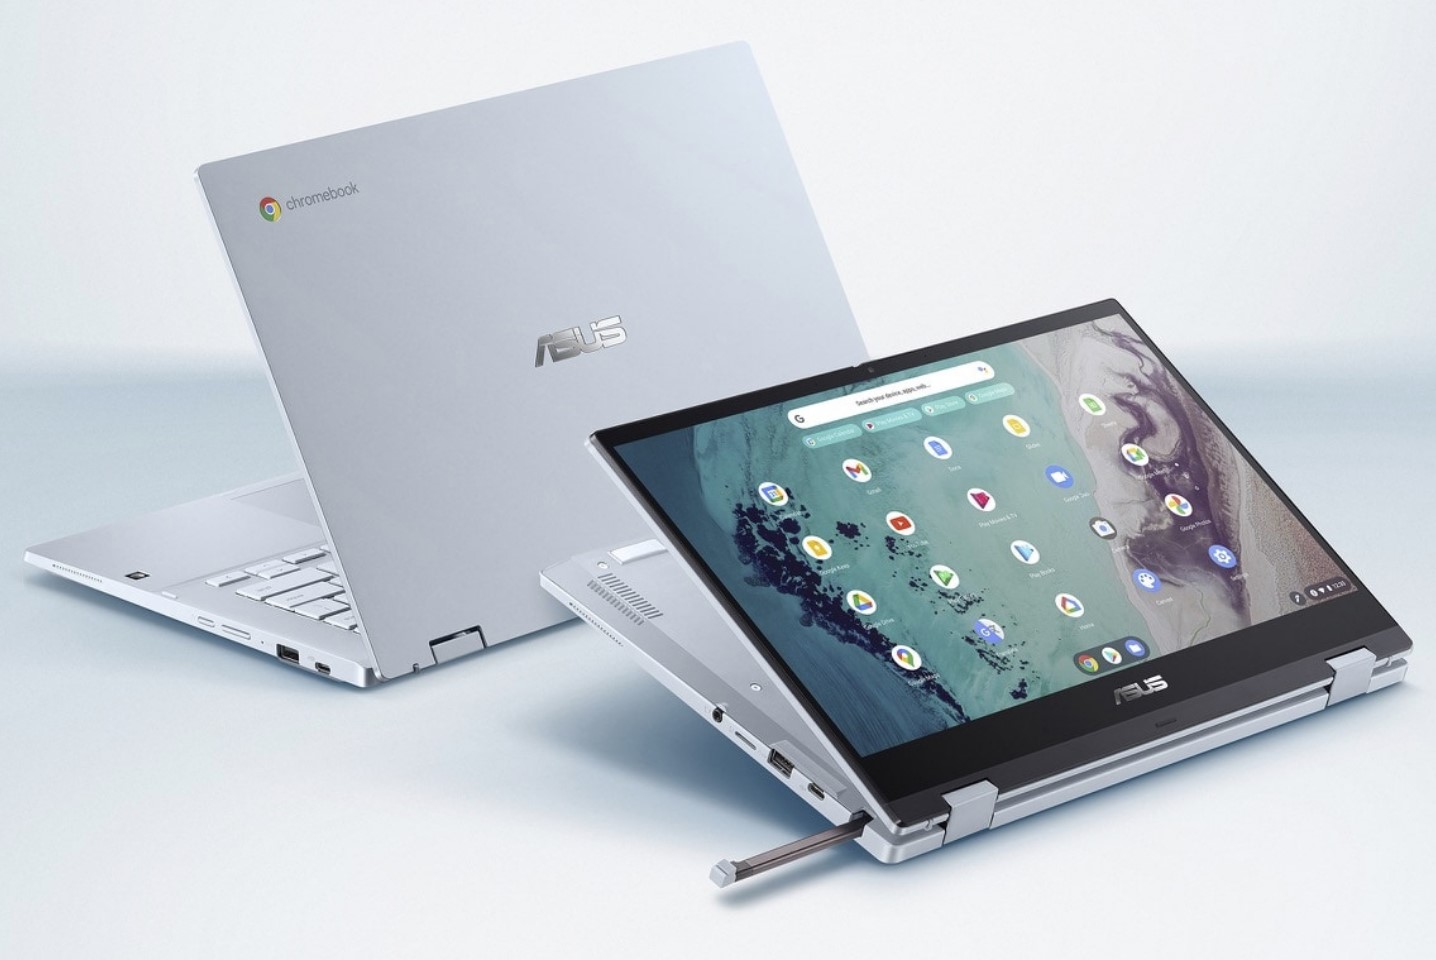 Asus Chromebook Flip CX3400 quietly debuts with fanless Intel Core processors